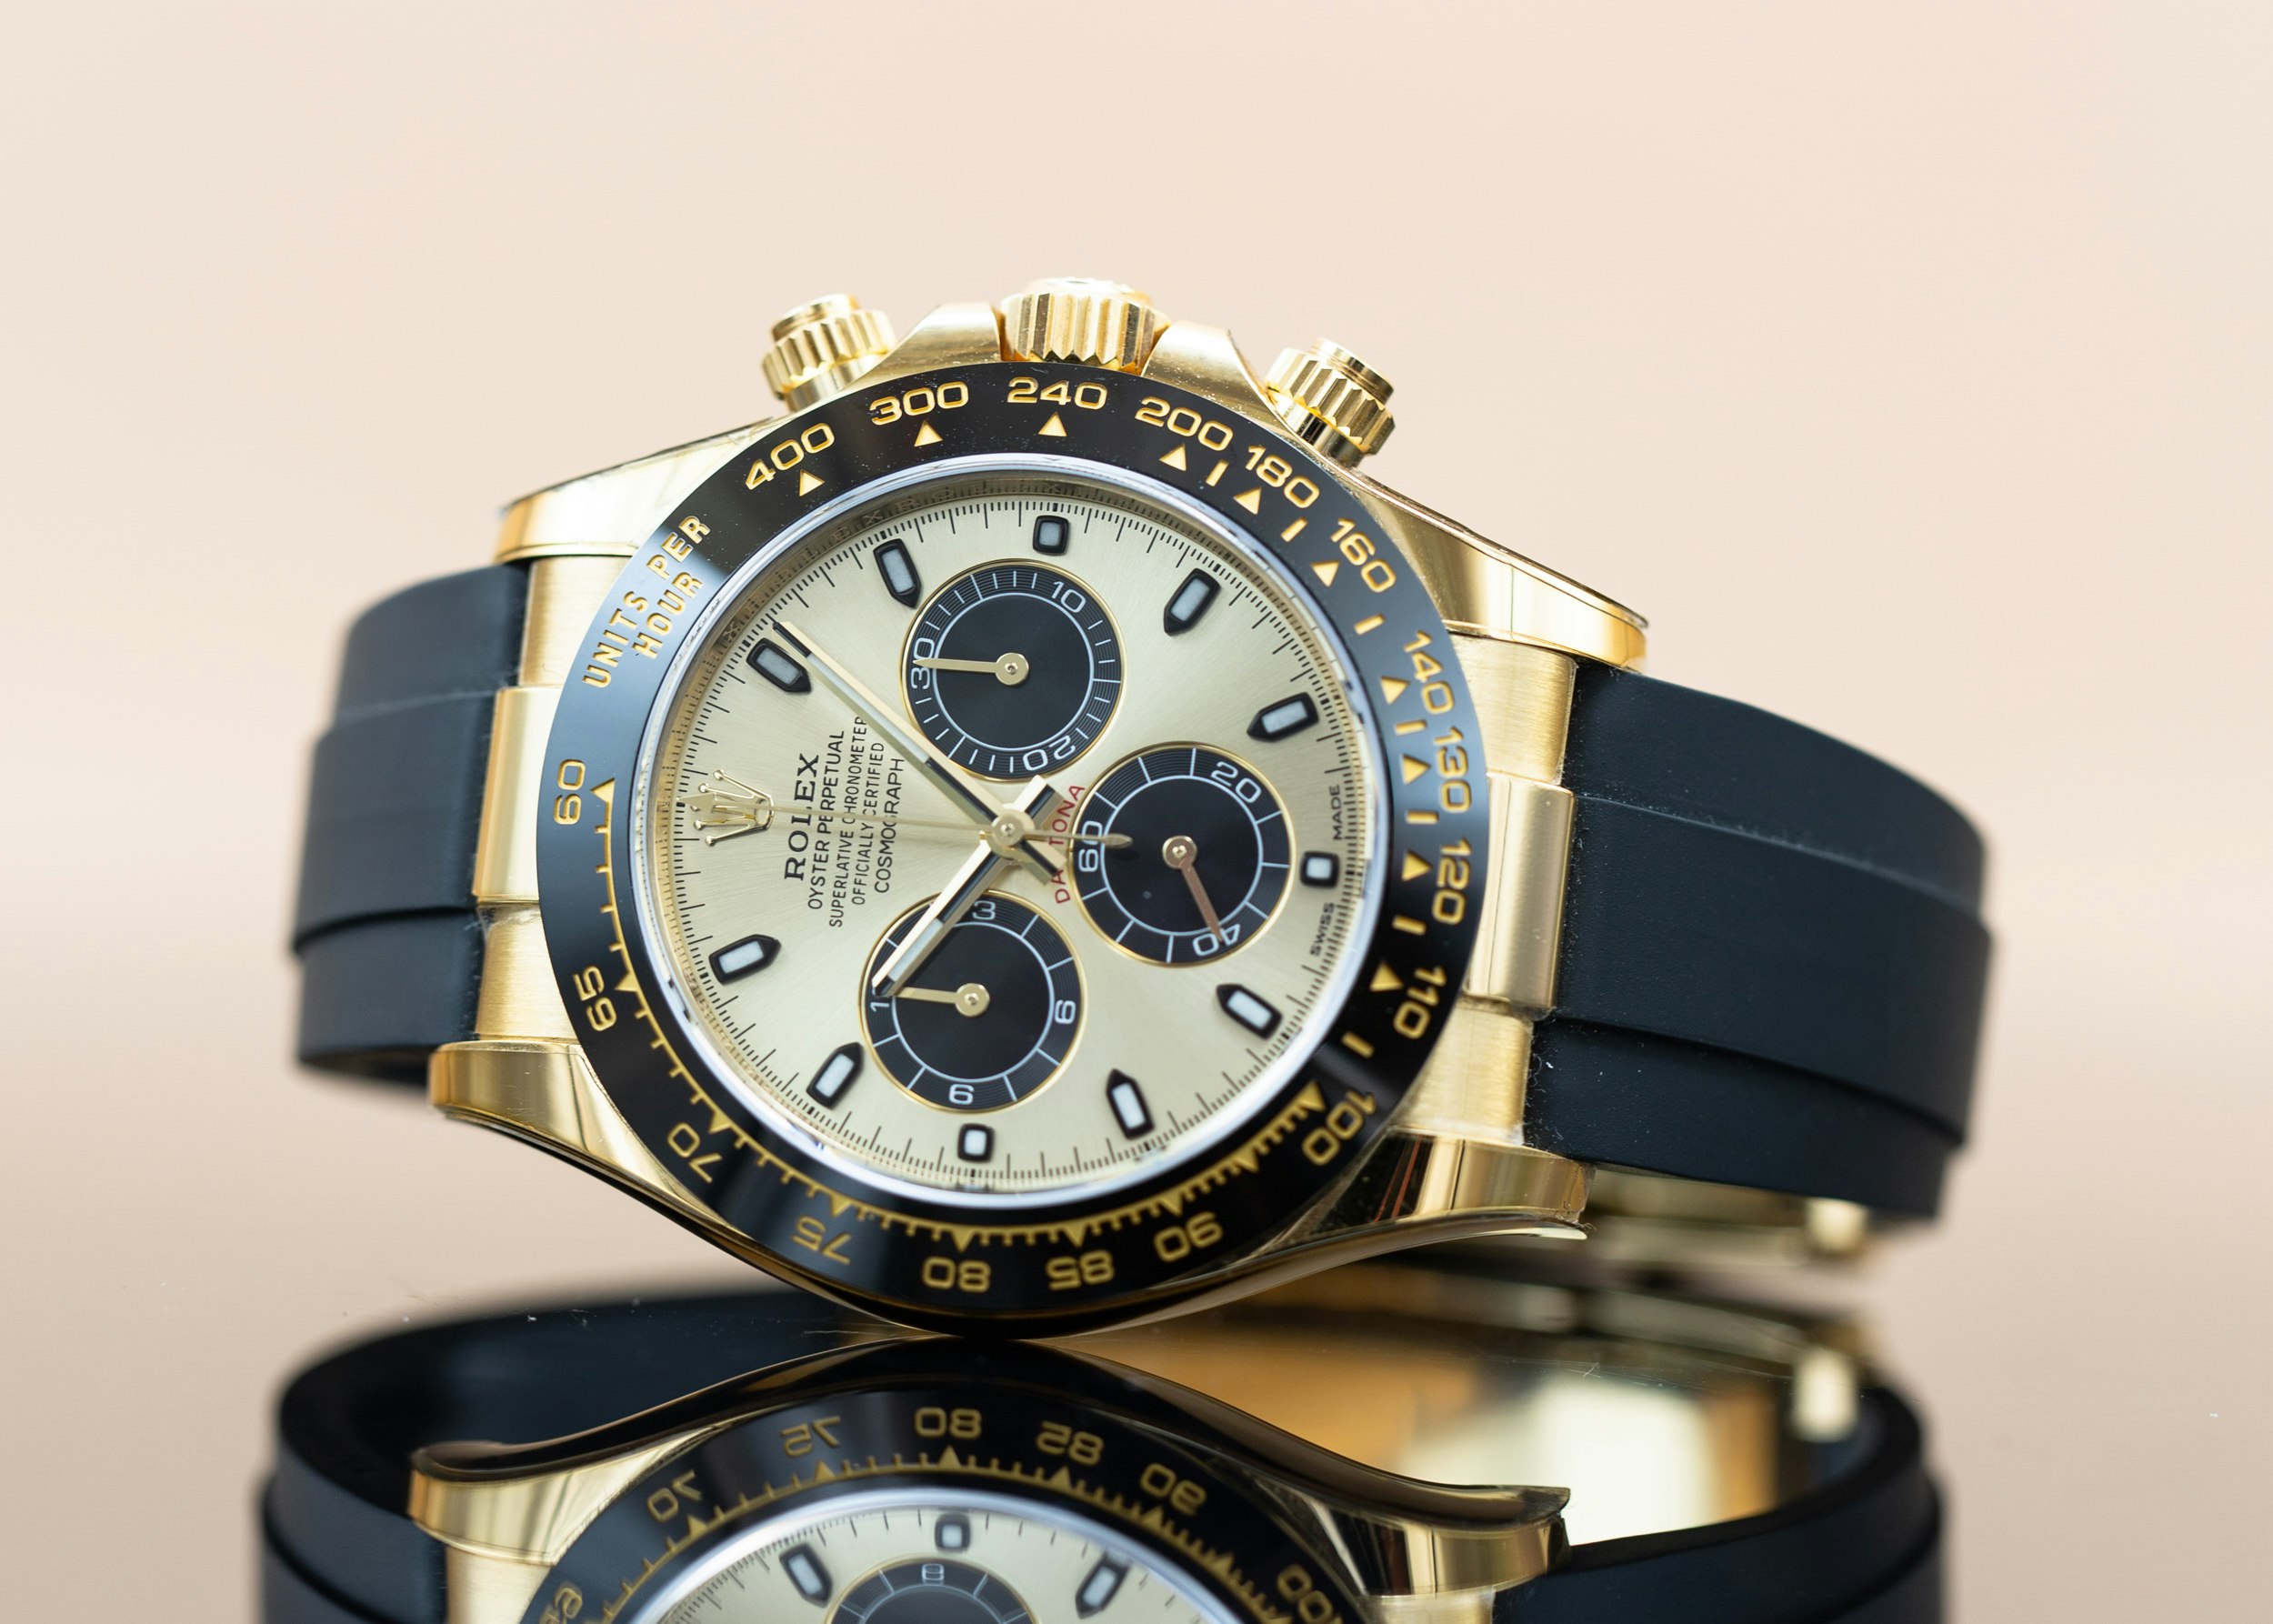 2021 ROLEX DAYTONA for sale by auction in London, United Kingdom